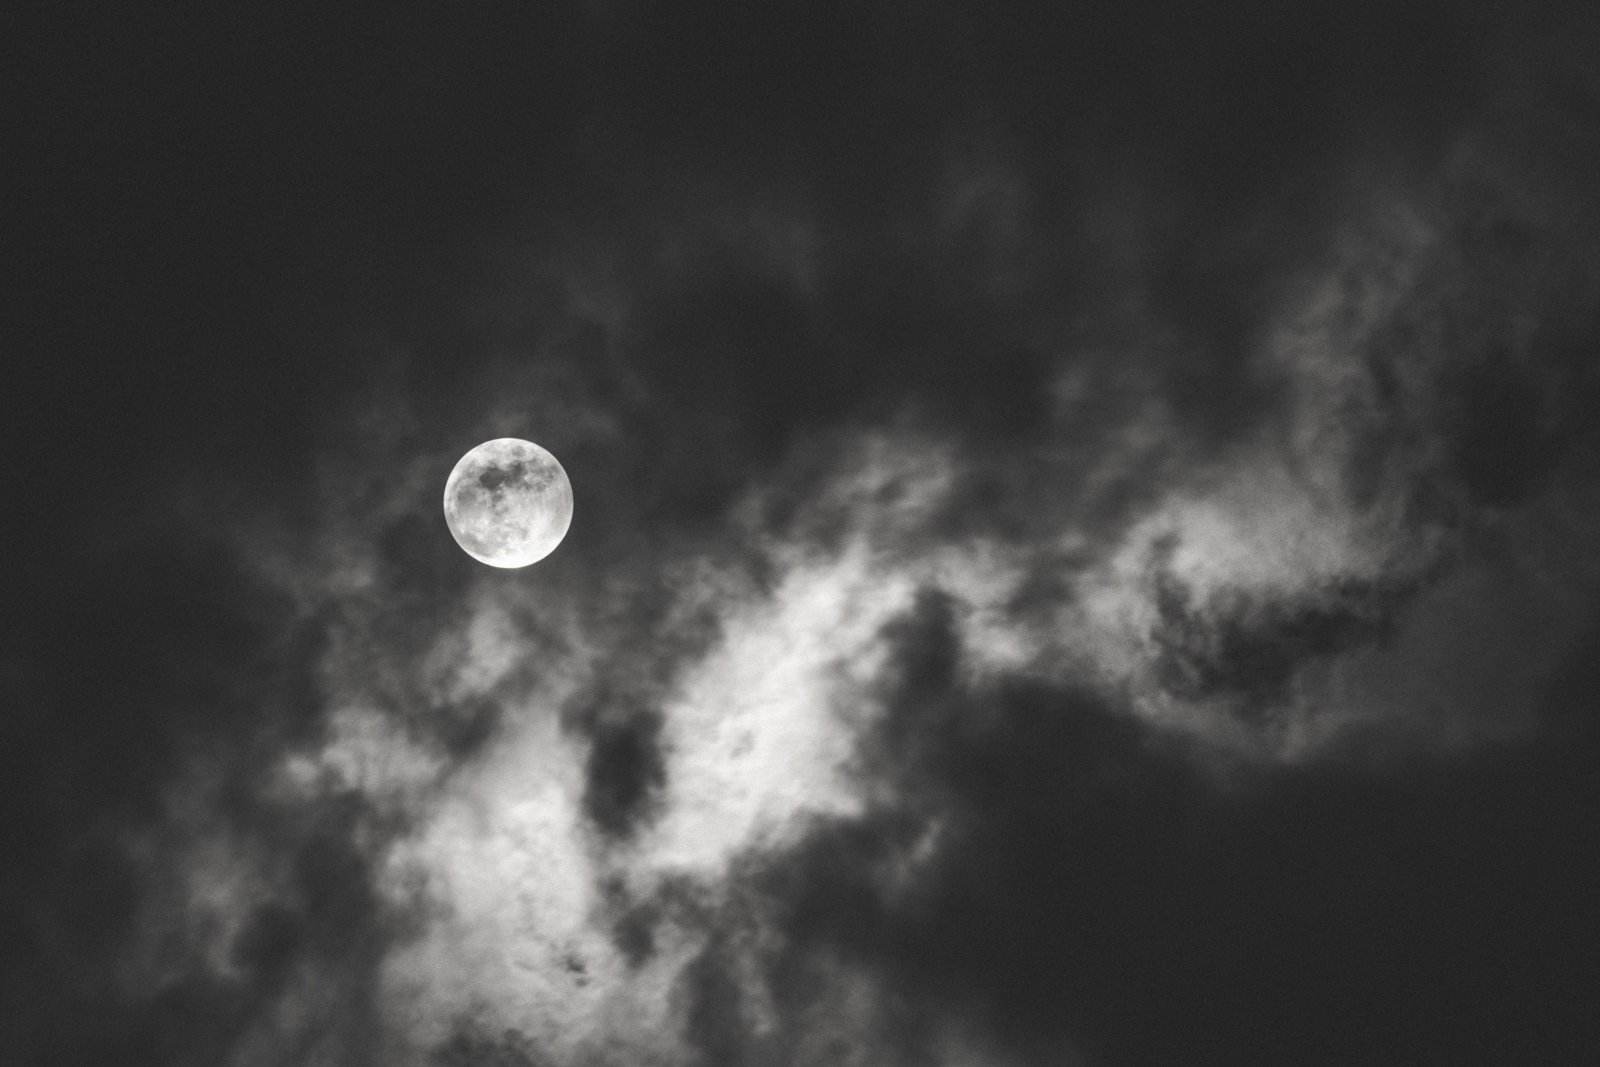 Dark shot of the full moon spreading light behind the clouds during nighttime